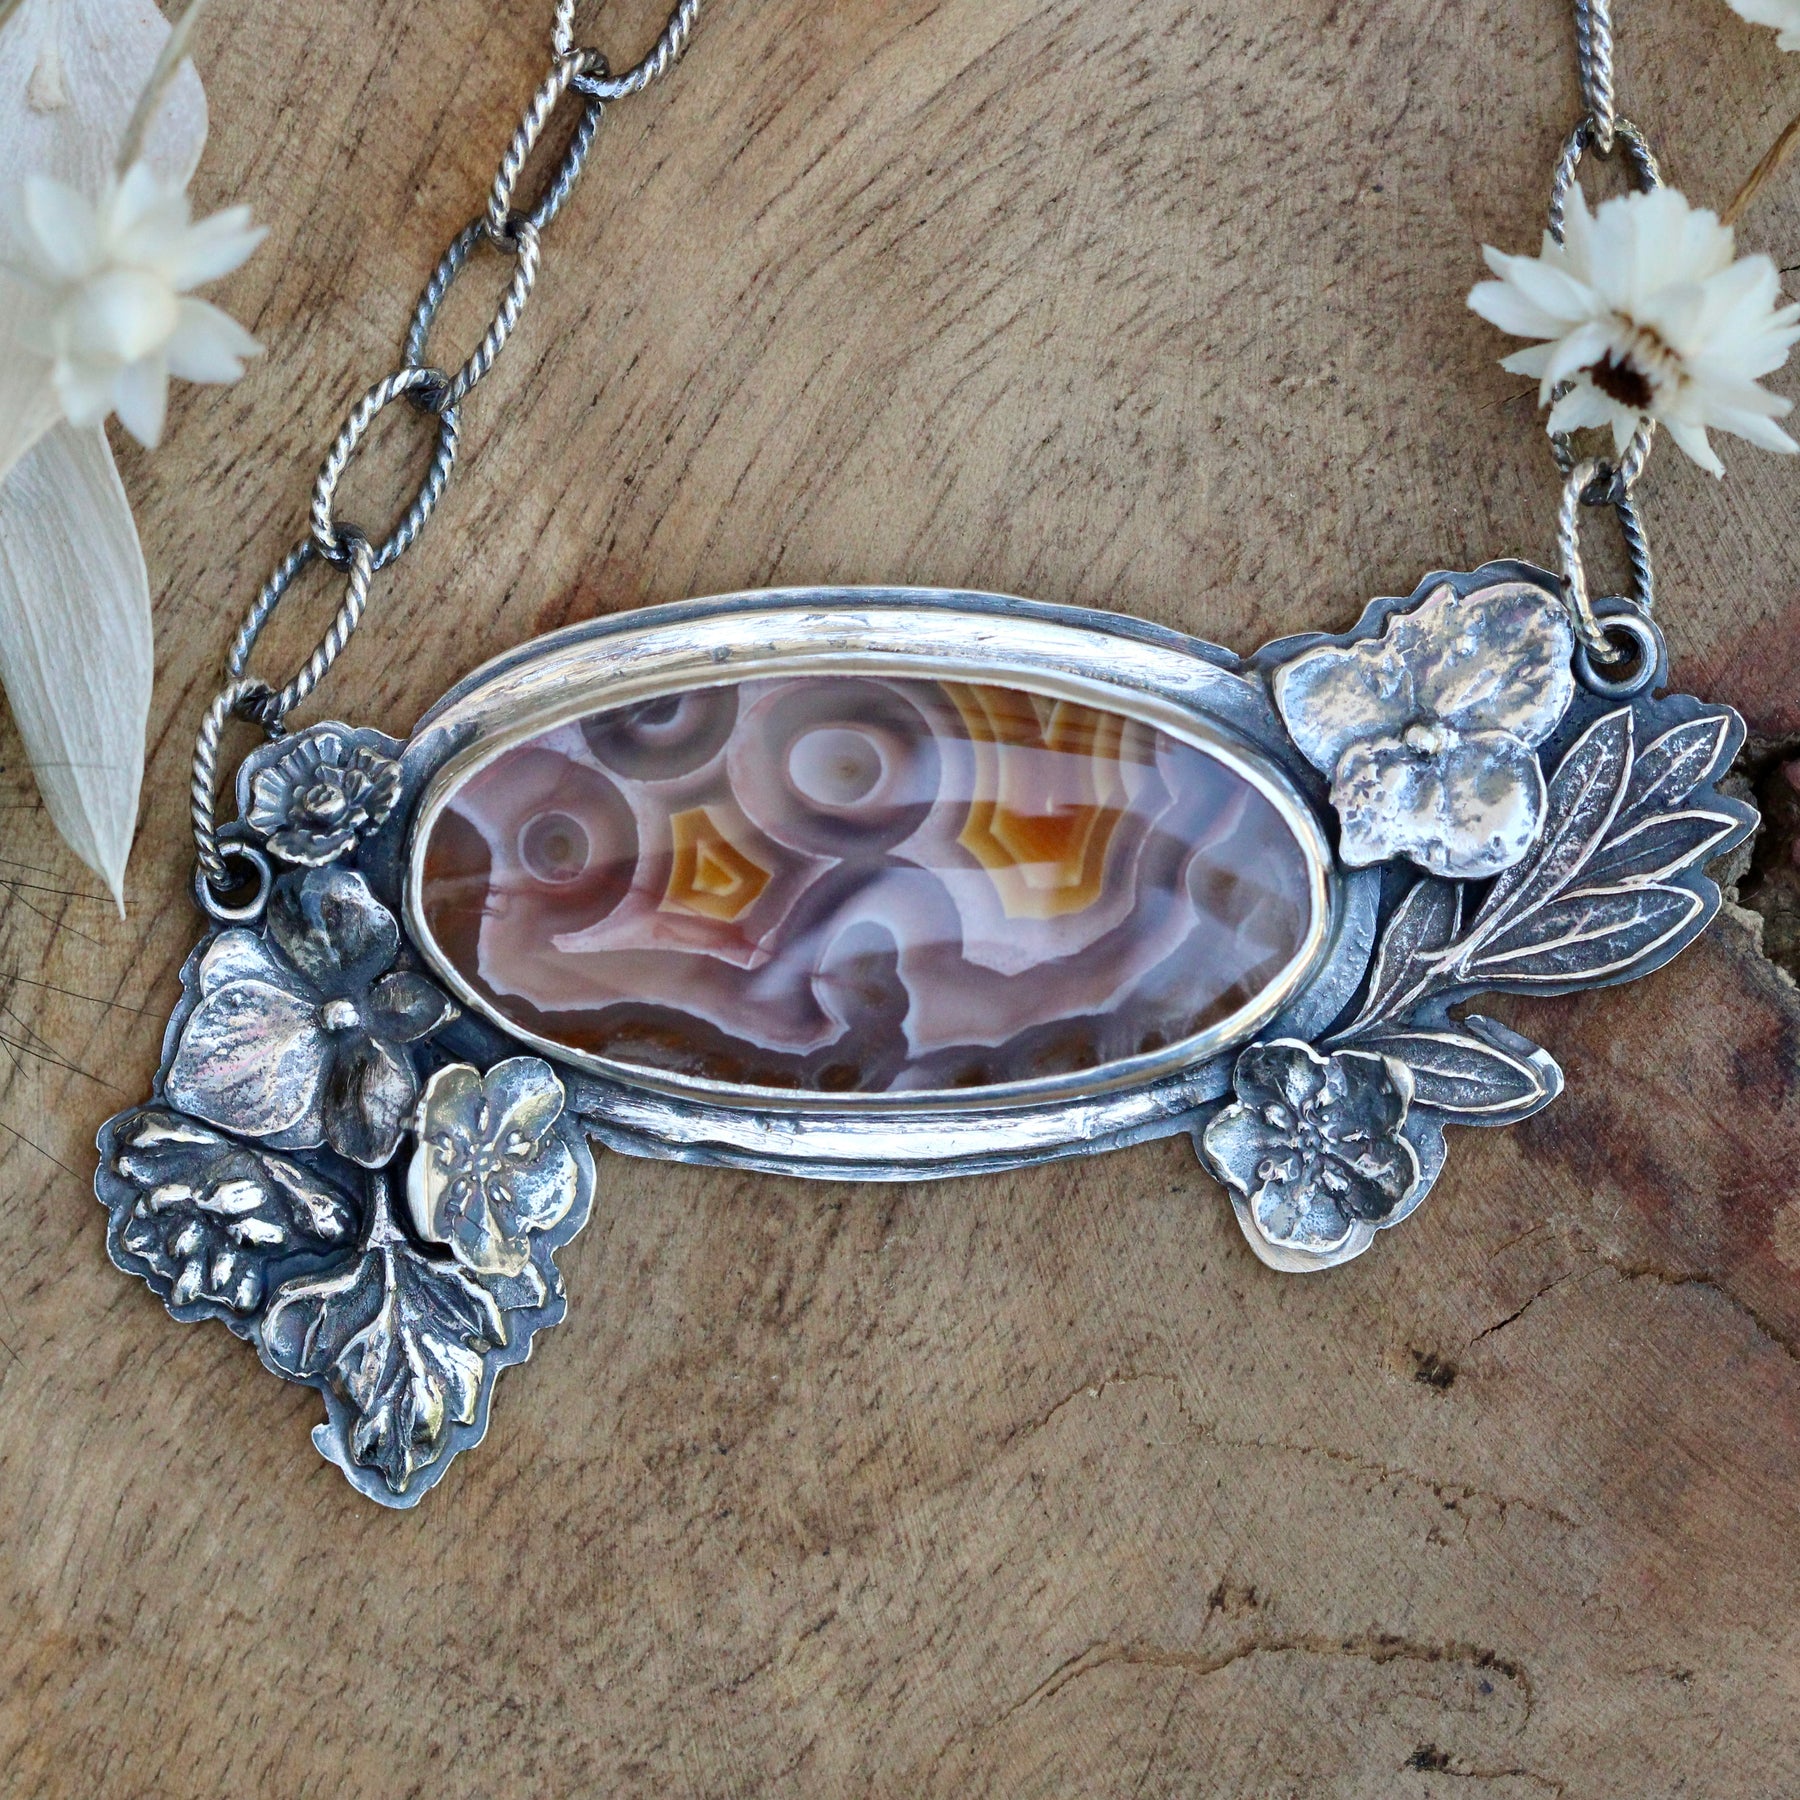 Wildflower Wanderings agate and sterling silver necklace